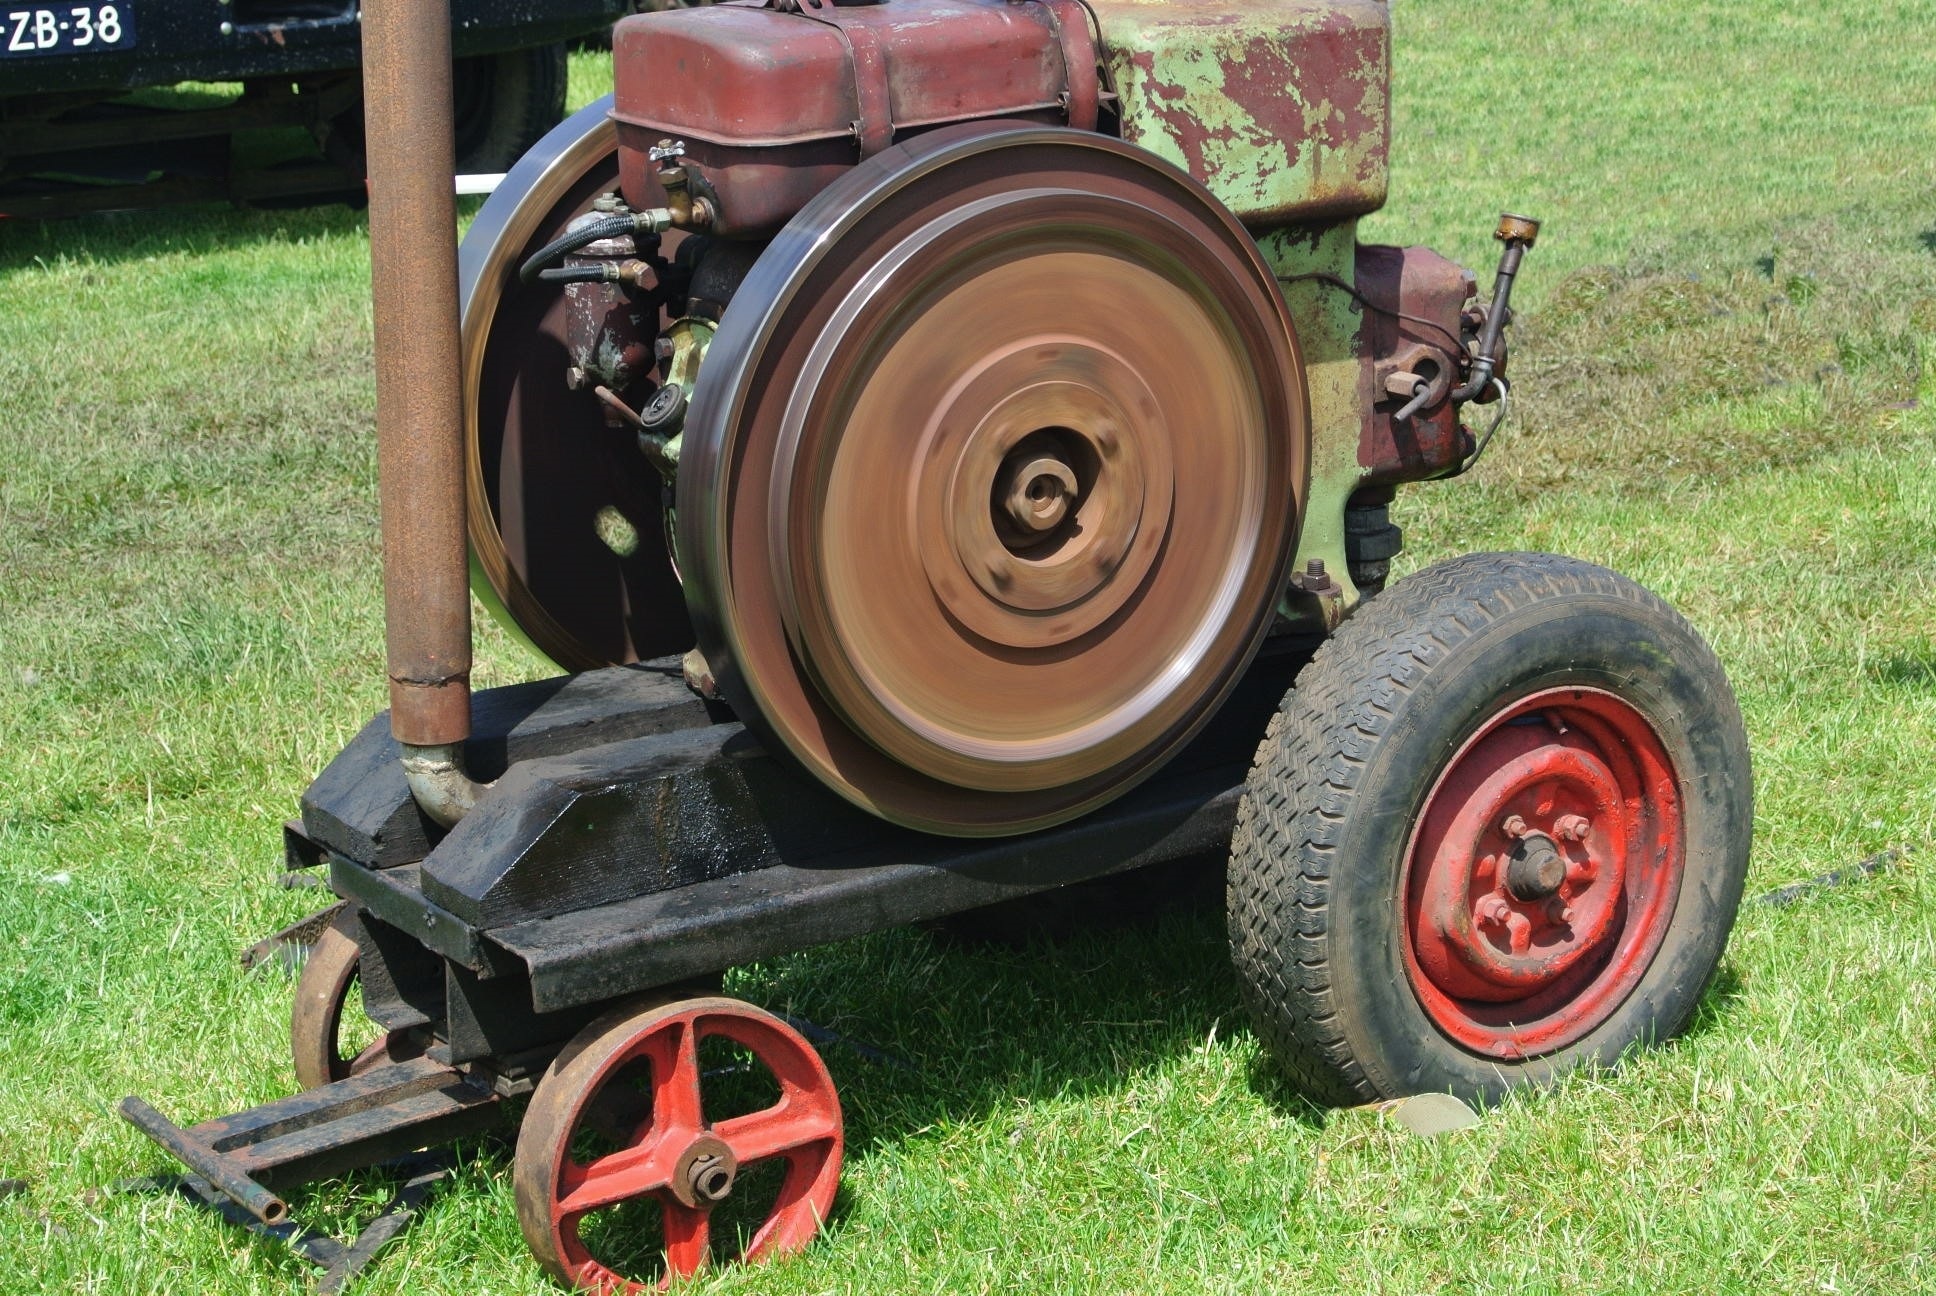 black and red lawn machine